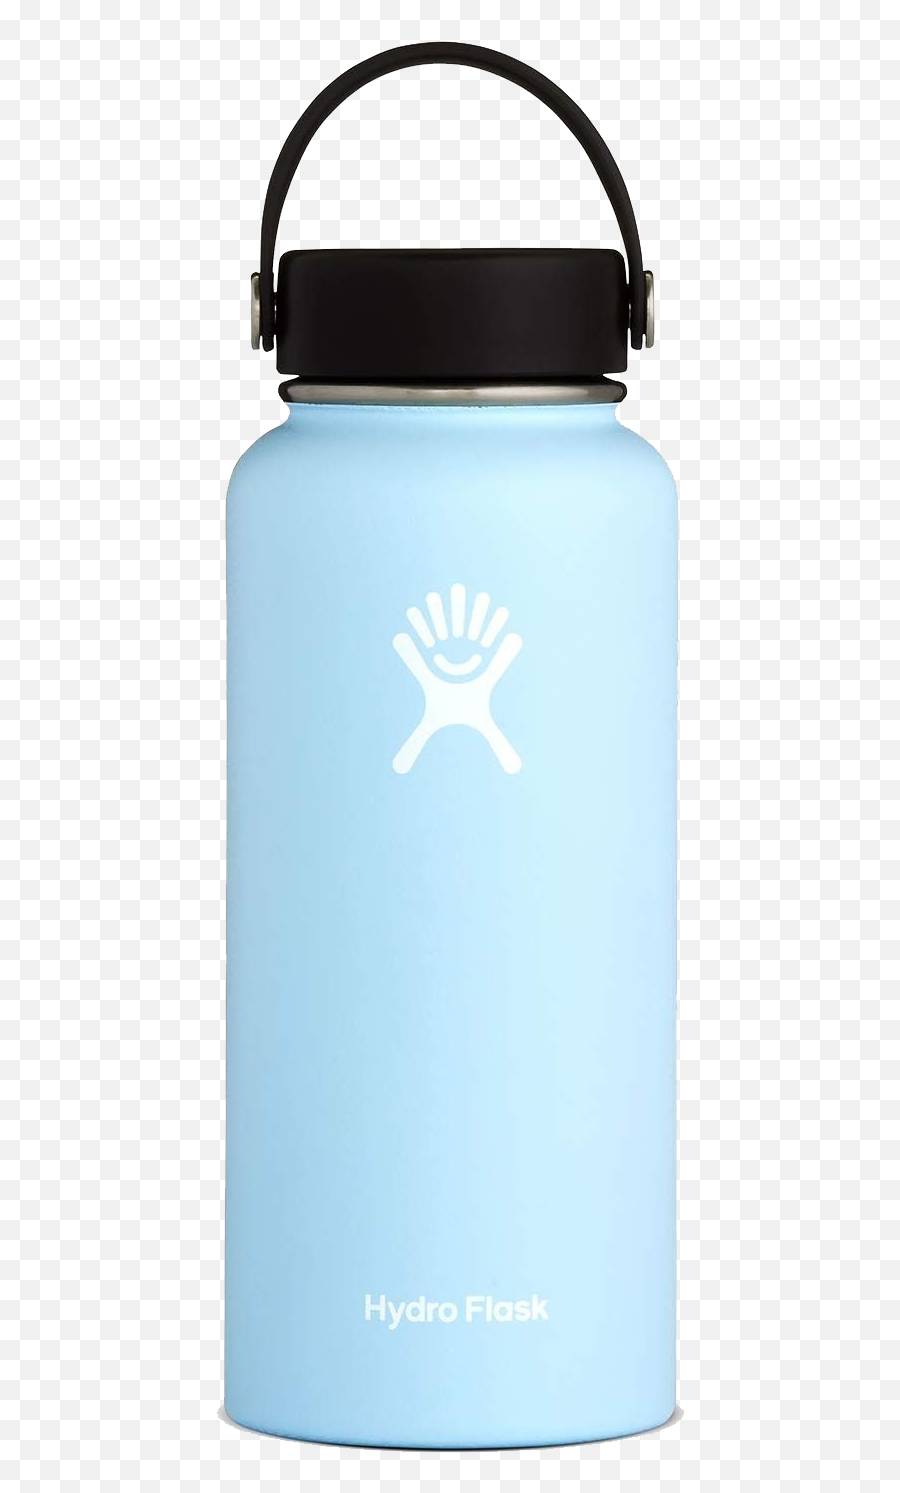 Hydro Flask Transparent Images Png - Blue Hydro Flask,Hydro Flask Png